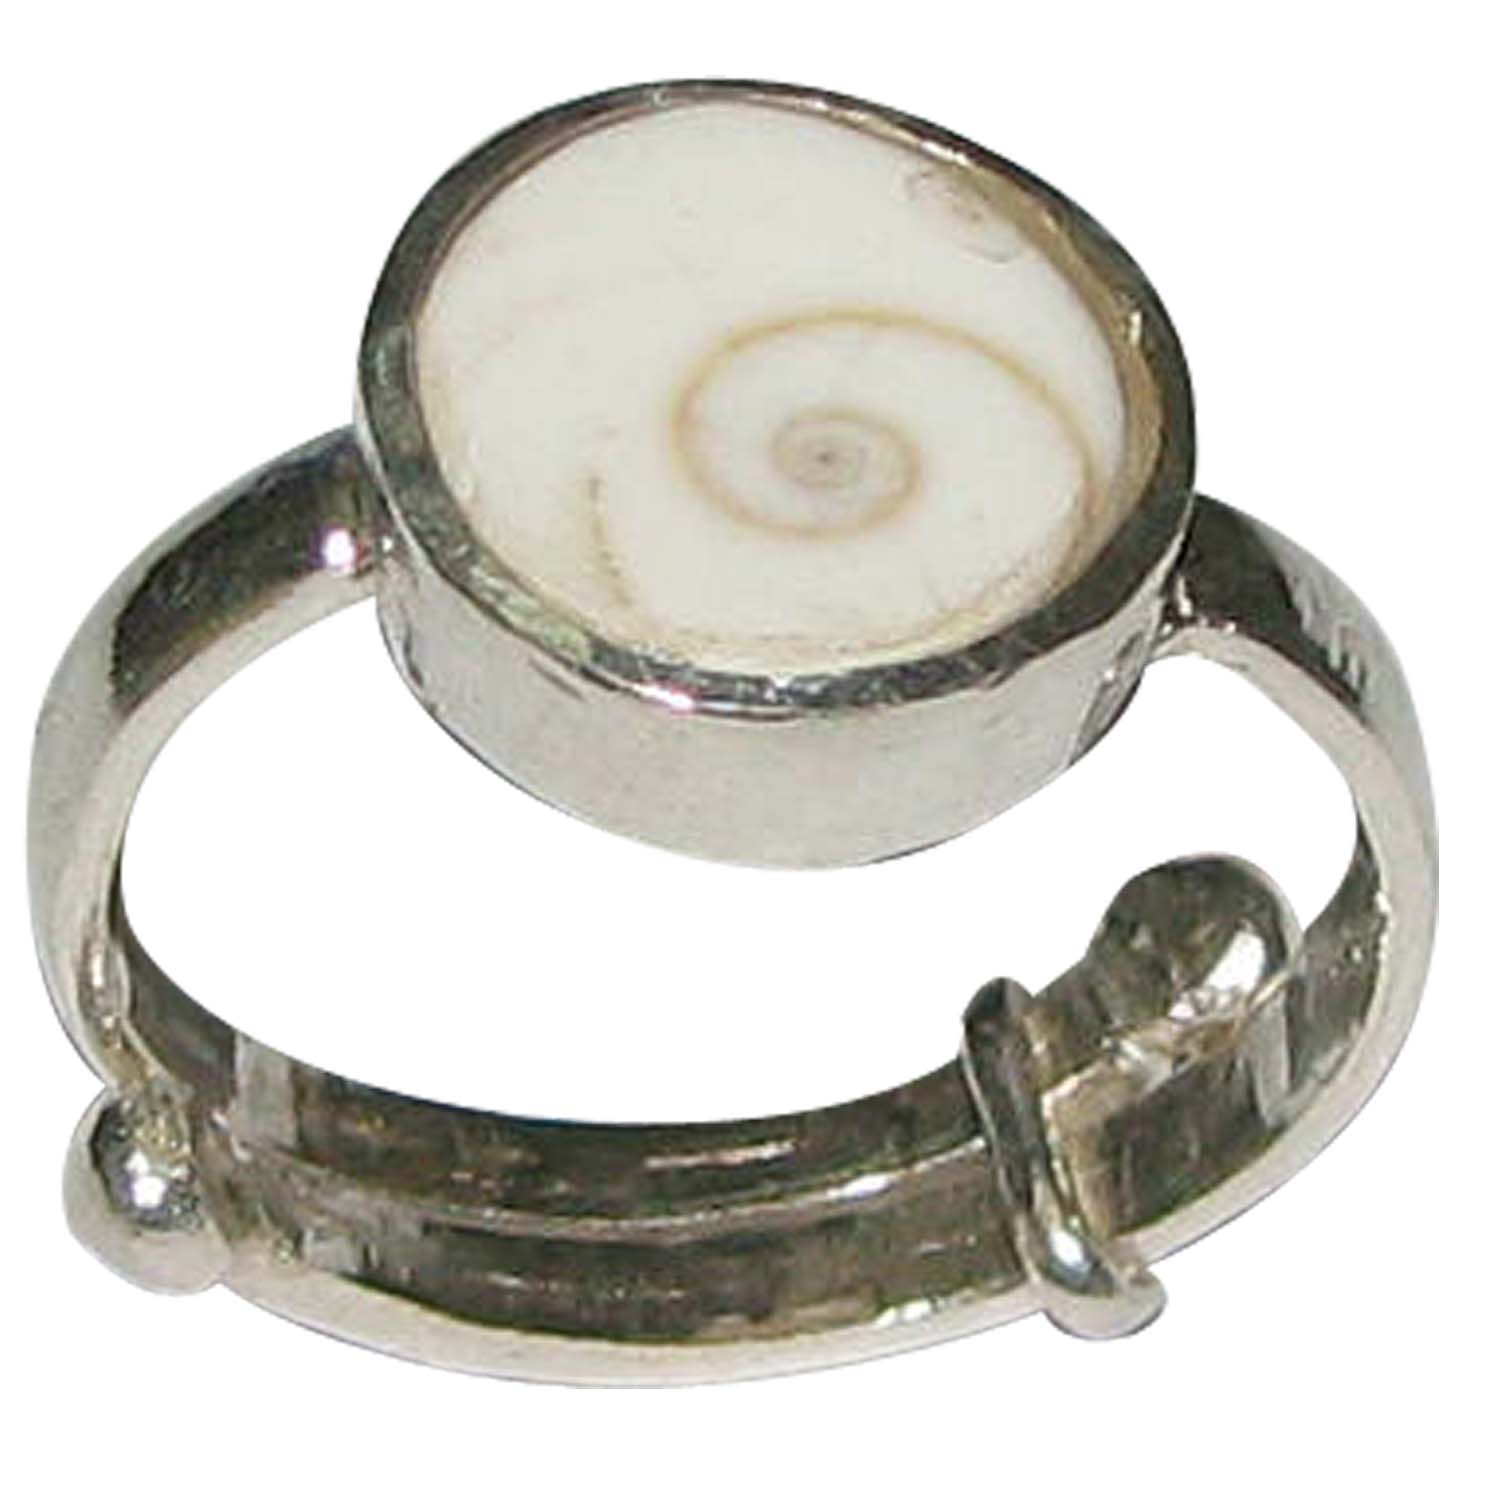 Buy Gomti chakra Ring Online at Low Prices in India - Paytmmall.com